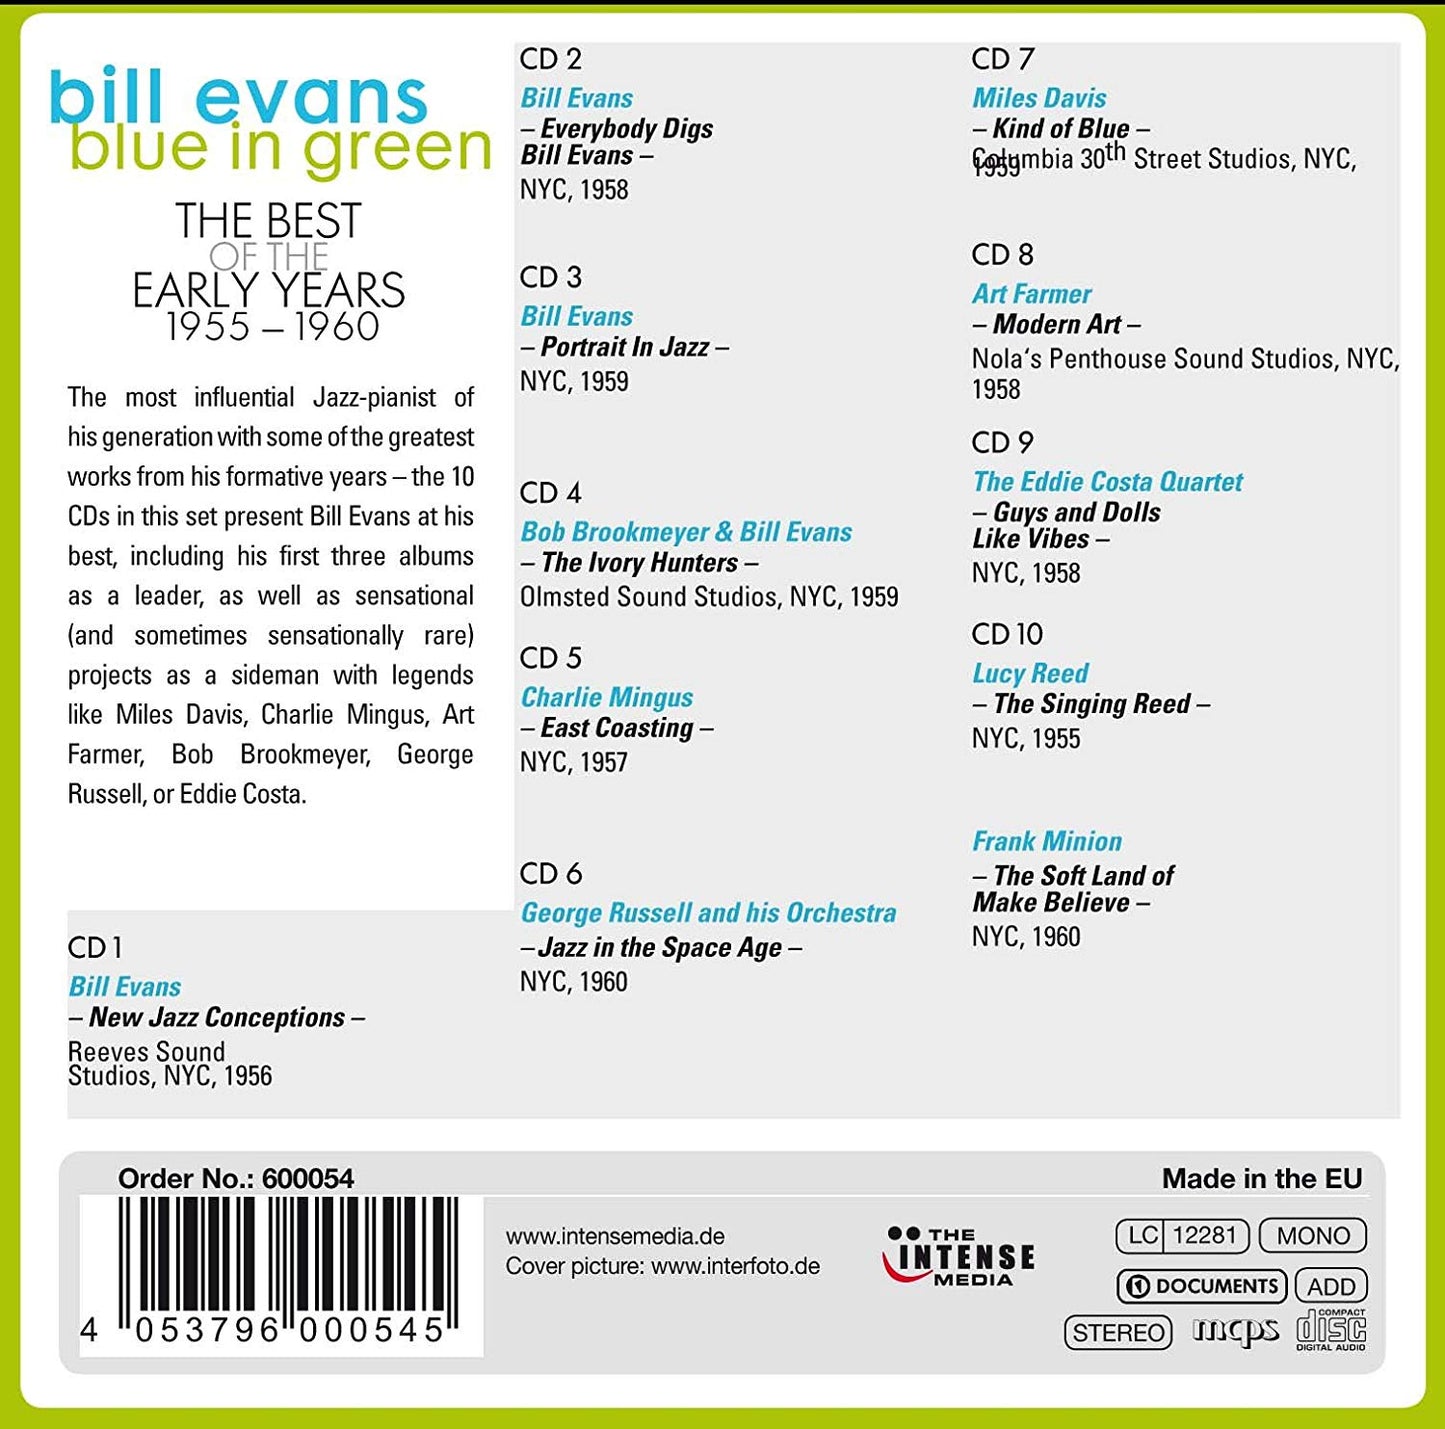 BILL EVANS: Blue In Green - The Best Of The Early Years 1955-1960 (10 CDs)